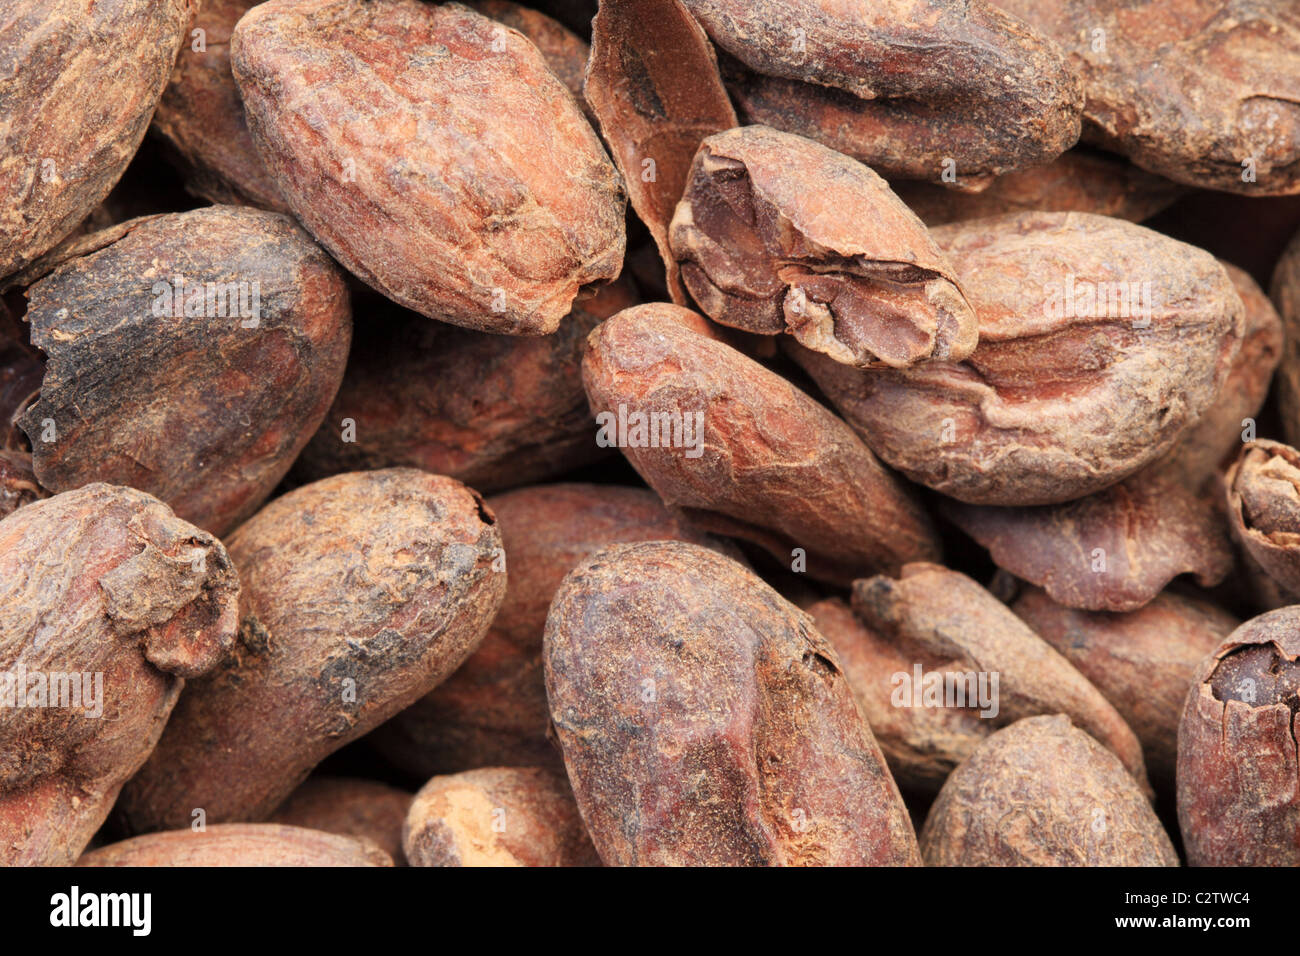 macro image of cocoa or cacao beans Stock Photo